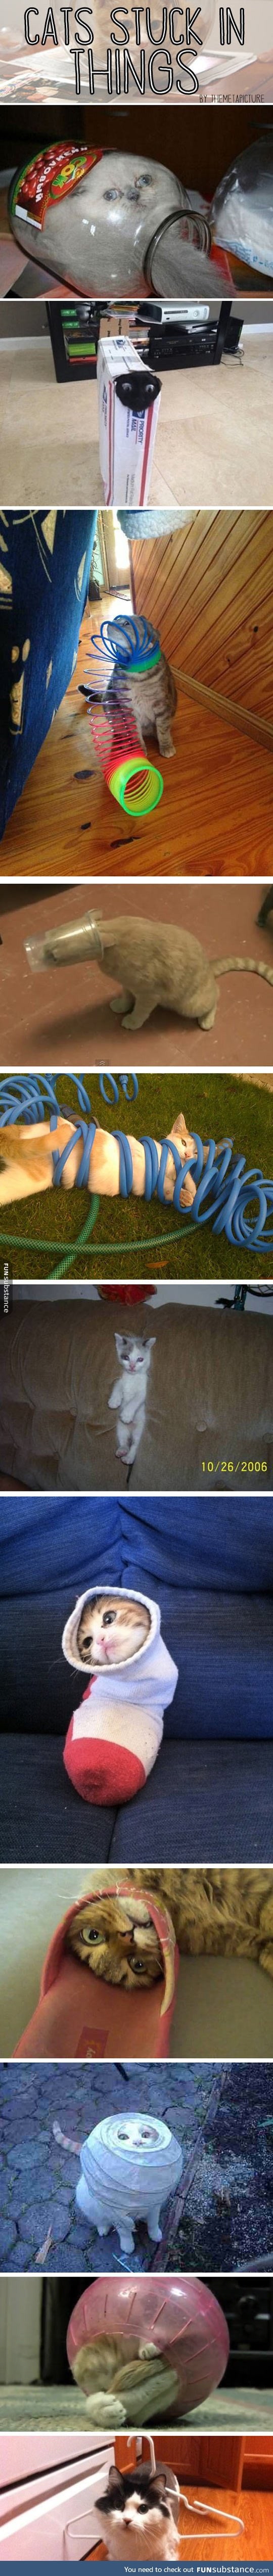 Cats who got stuck in things